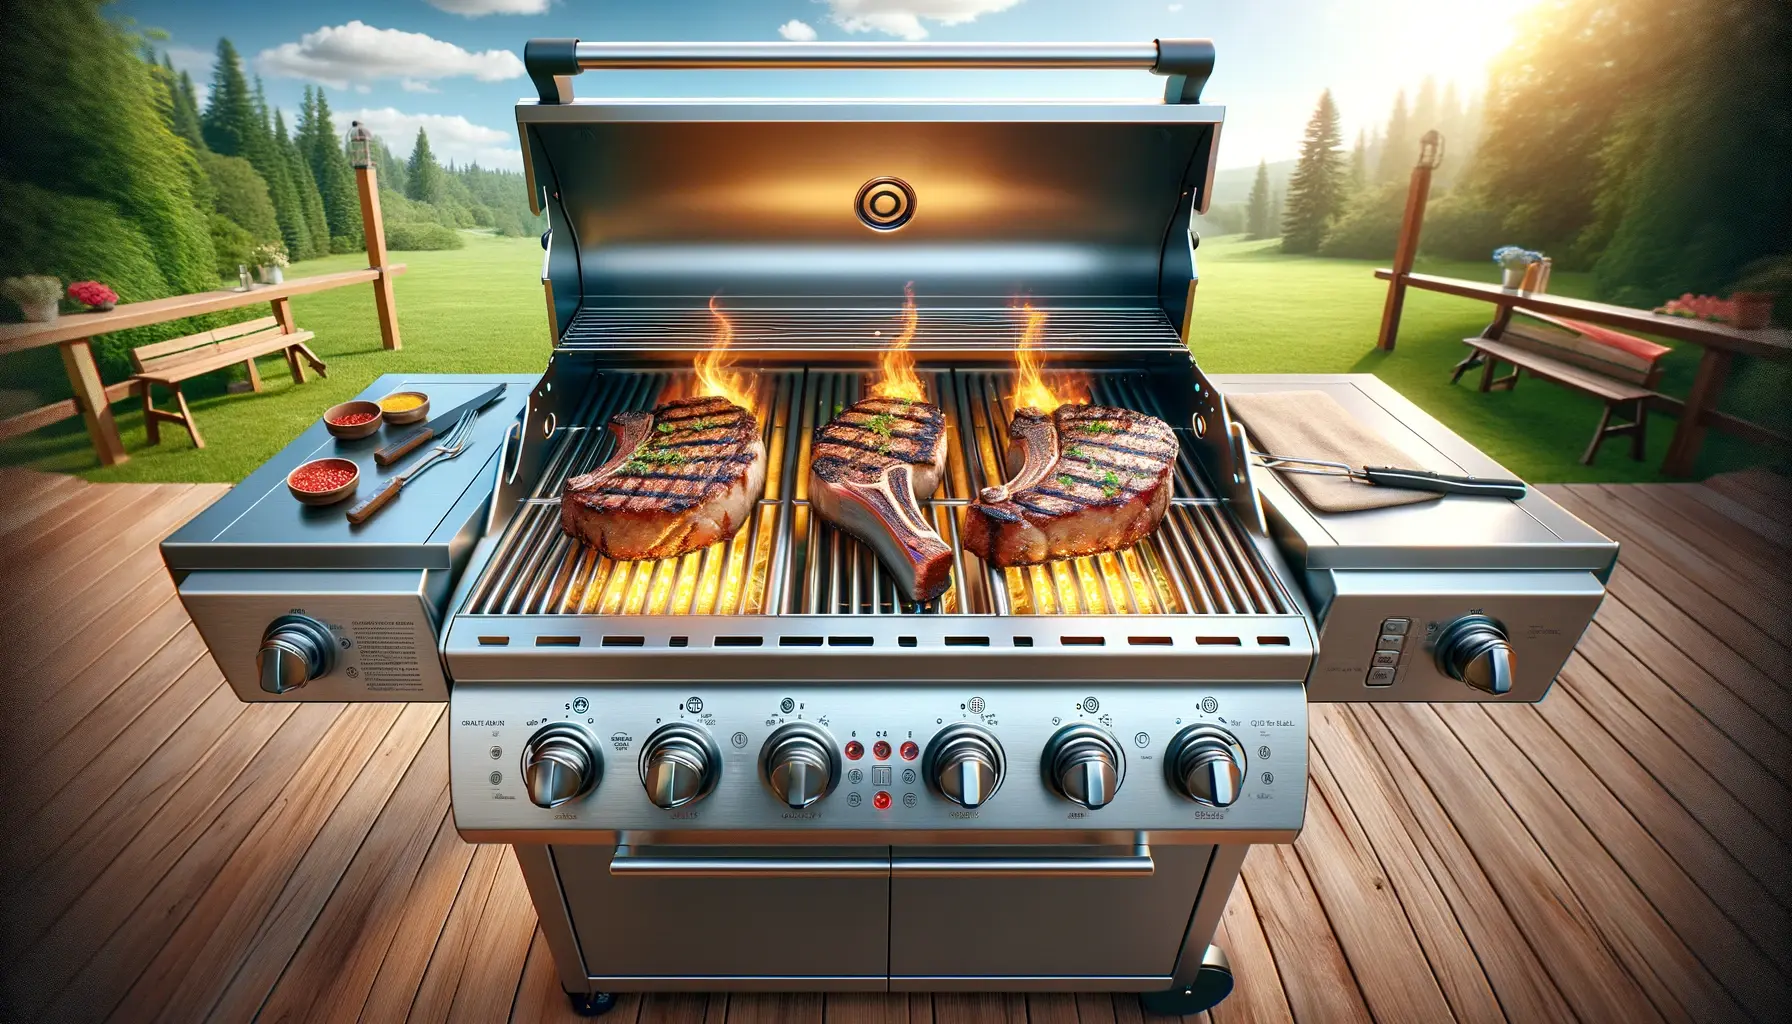 Tips for how to get the most out of your summer grilling